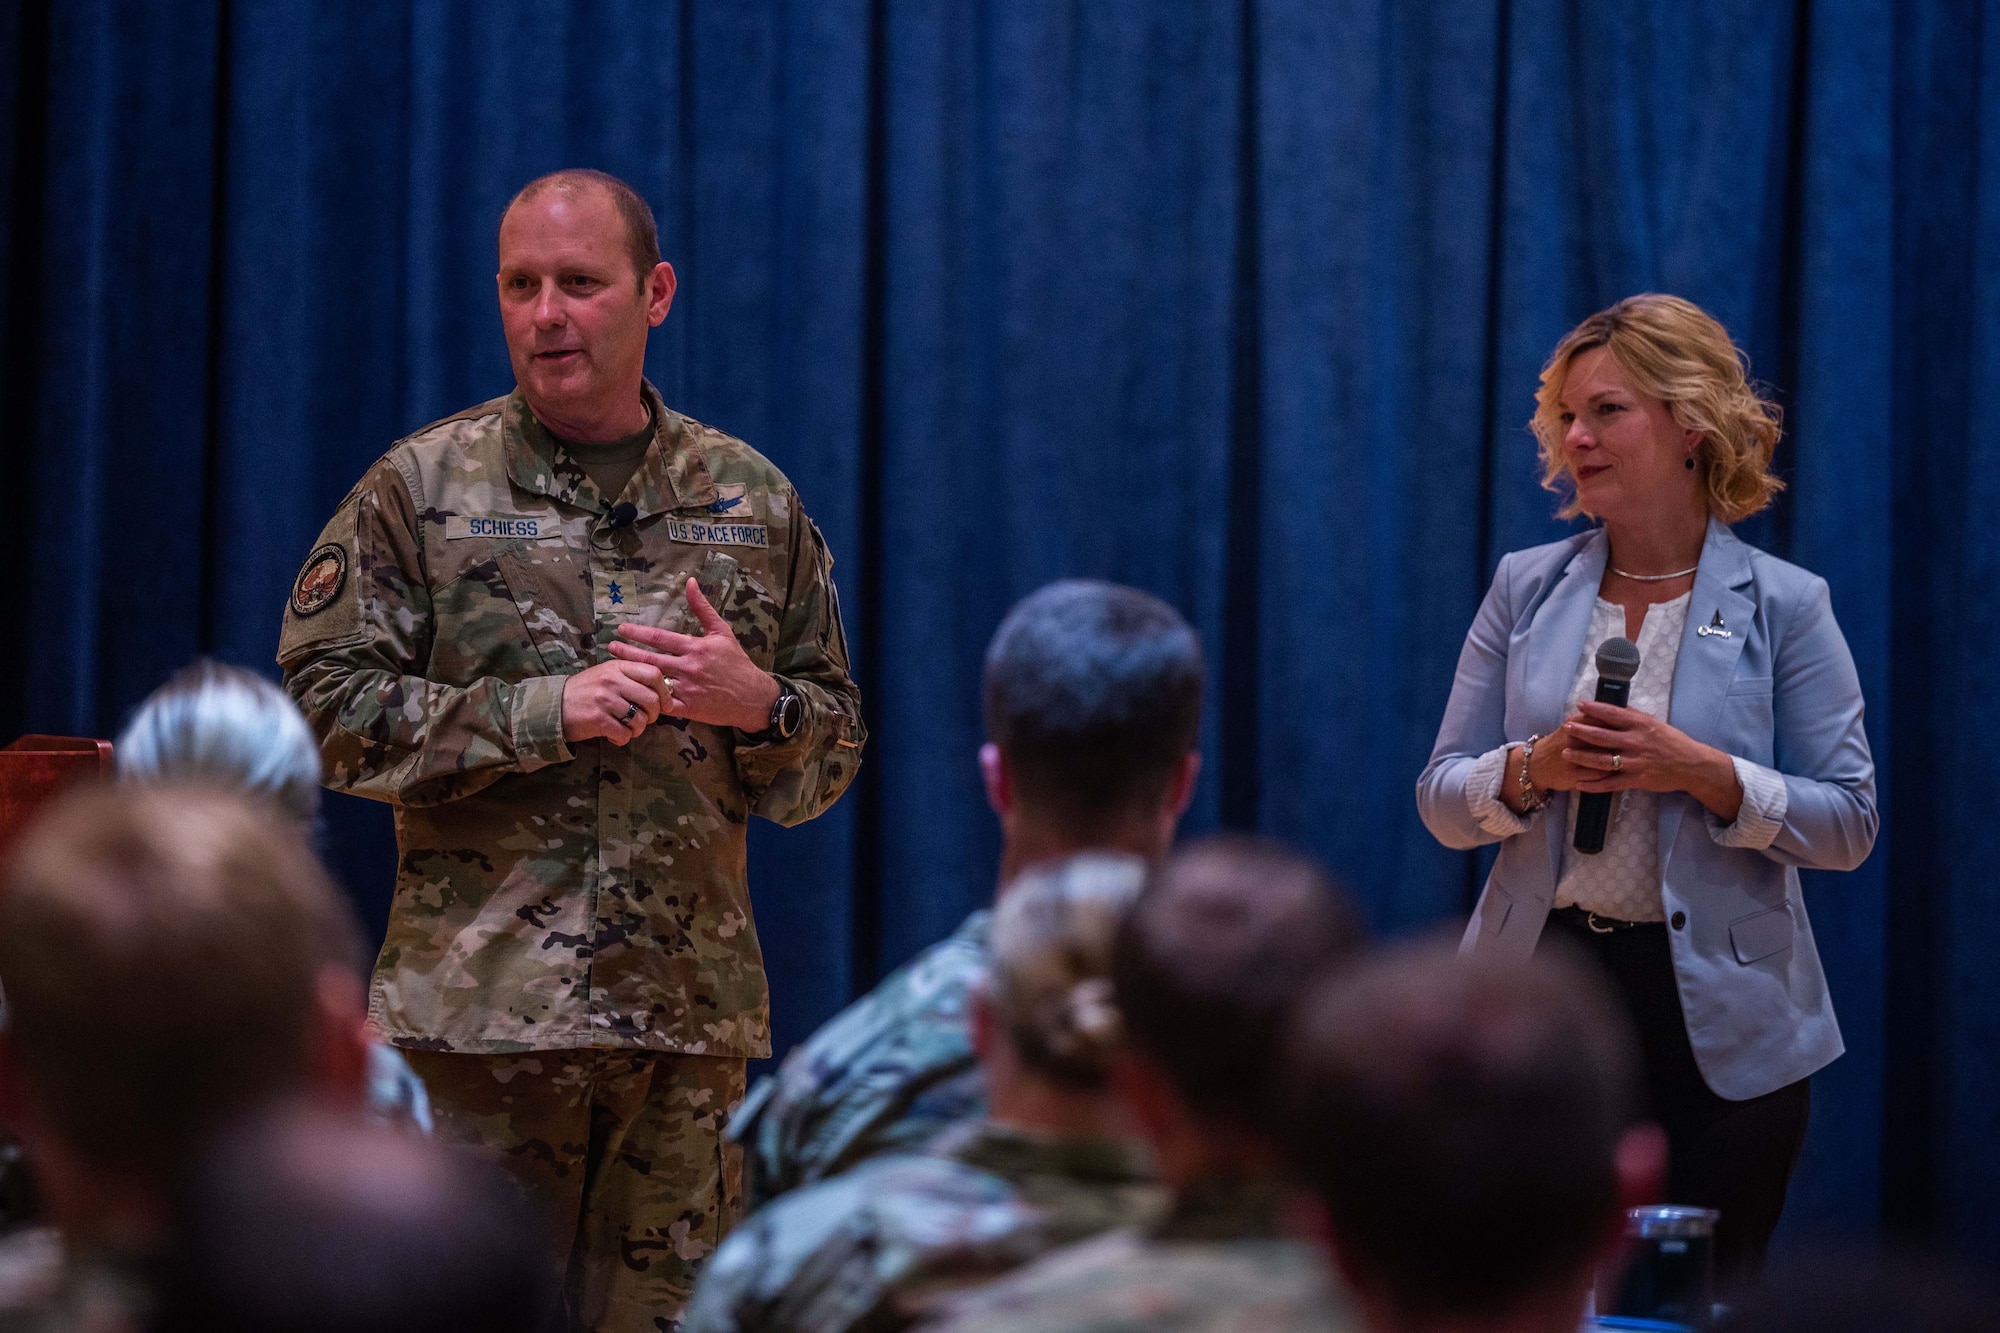 U.S. Space Force Maj. Gen. Douglas A. Schiess, Combined Force Space Component Command commander, left, and Mrs. Debbie Schiess, address audience members during the General’s first All Call as CFSCC commander at Vandenberg Space Force Base, Calif., Aug. 30, 2022. The couple has been together for over 30 years, and this will there third time at Vandenberg. (U.S. Space Force photo by Tech. Sgt. Luke Kitterman)